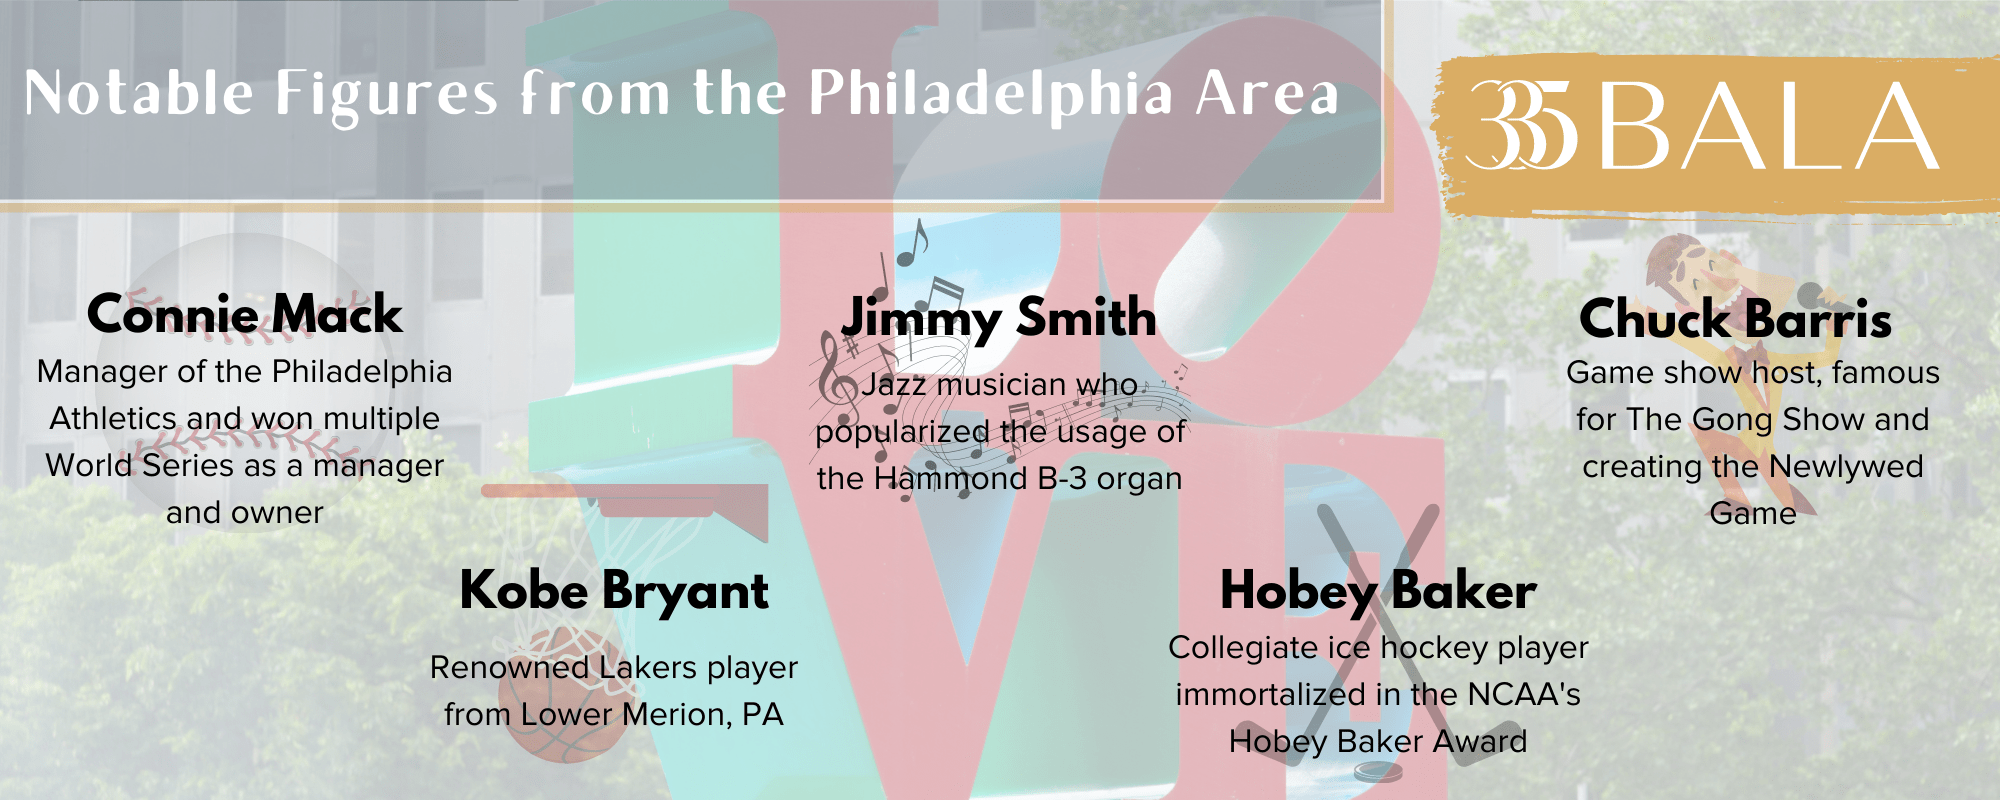 Infographic listing notable famous people from the Philadelphia area.